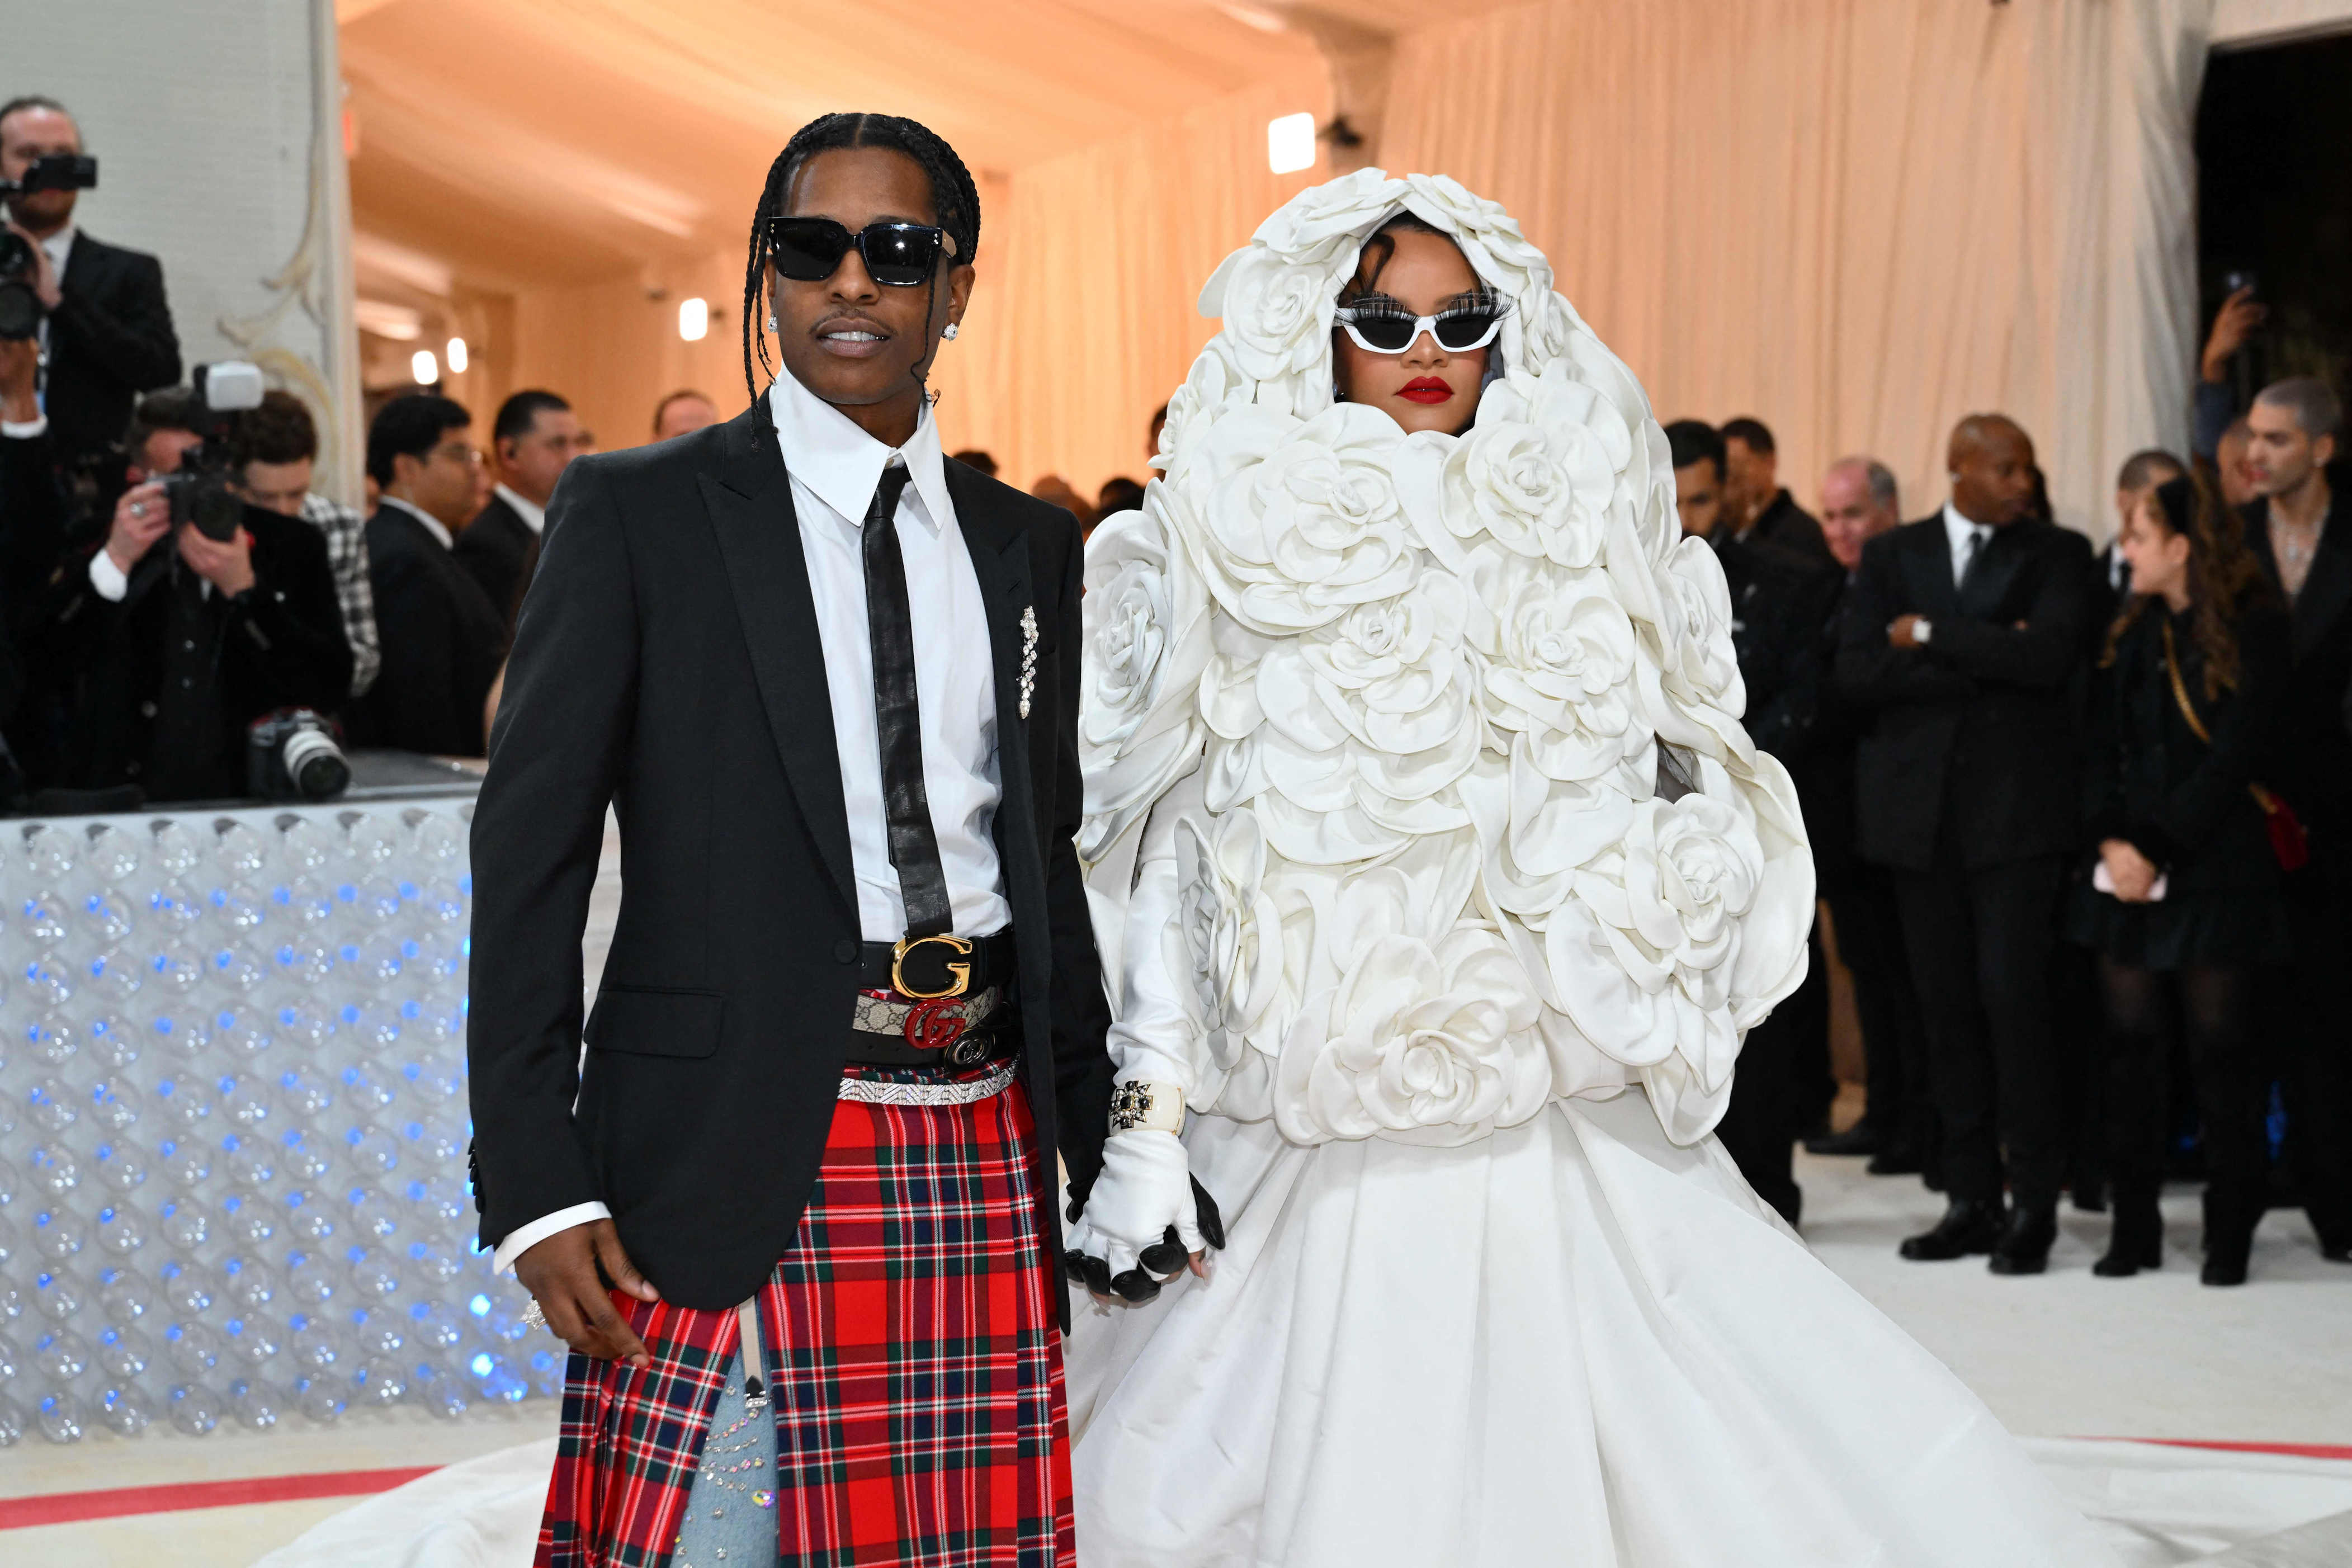 met gala: everything to know about fashion's biggest night – and the sleeping beauties theme